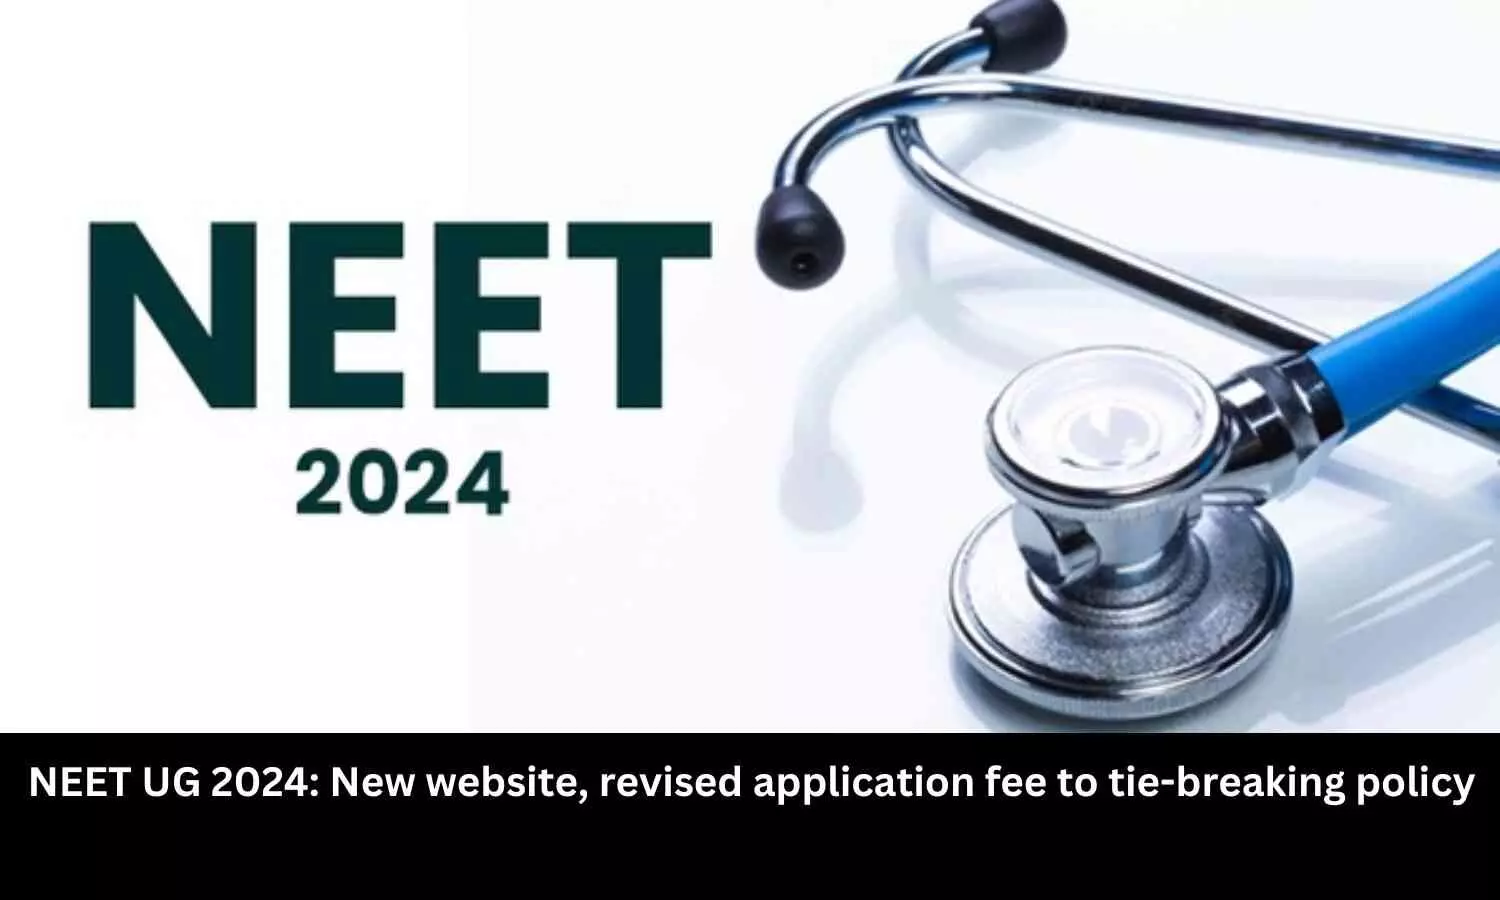 NEET 2024: Key changes introduced this year